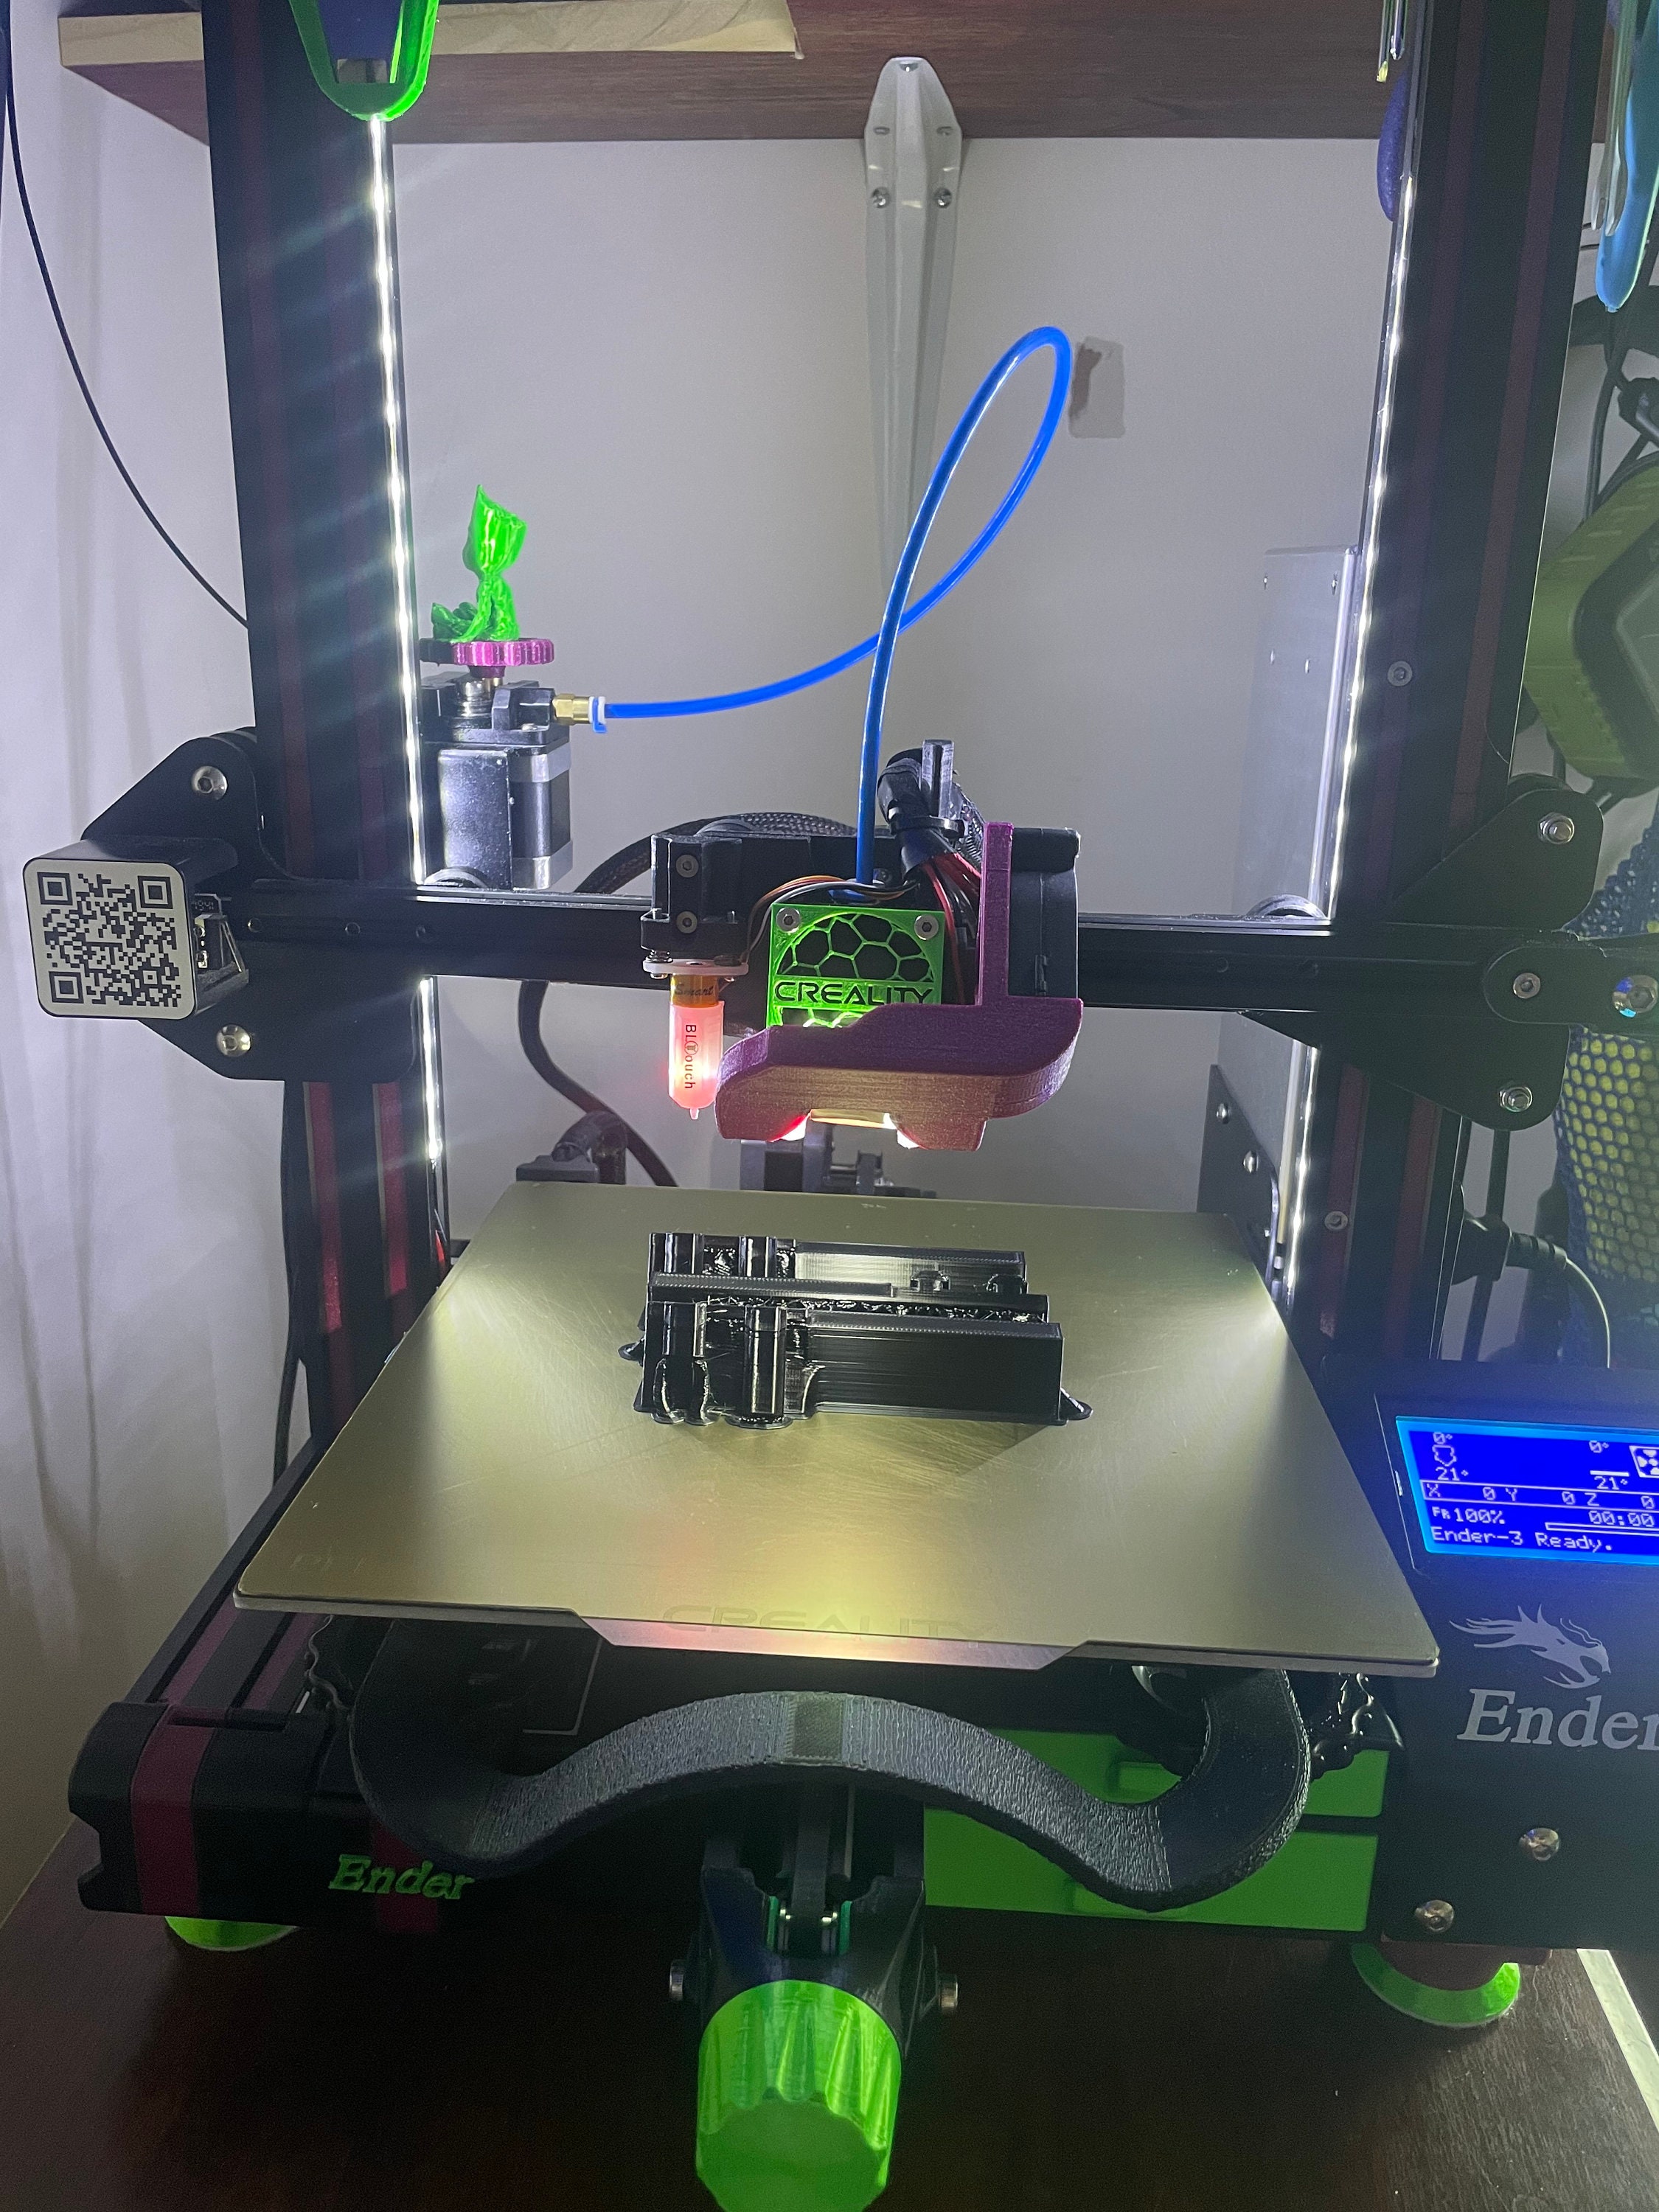 LPT- Standard LED strip lights fit perfectly inside the Ender 3 extrusions.  : r/ender3